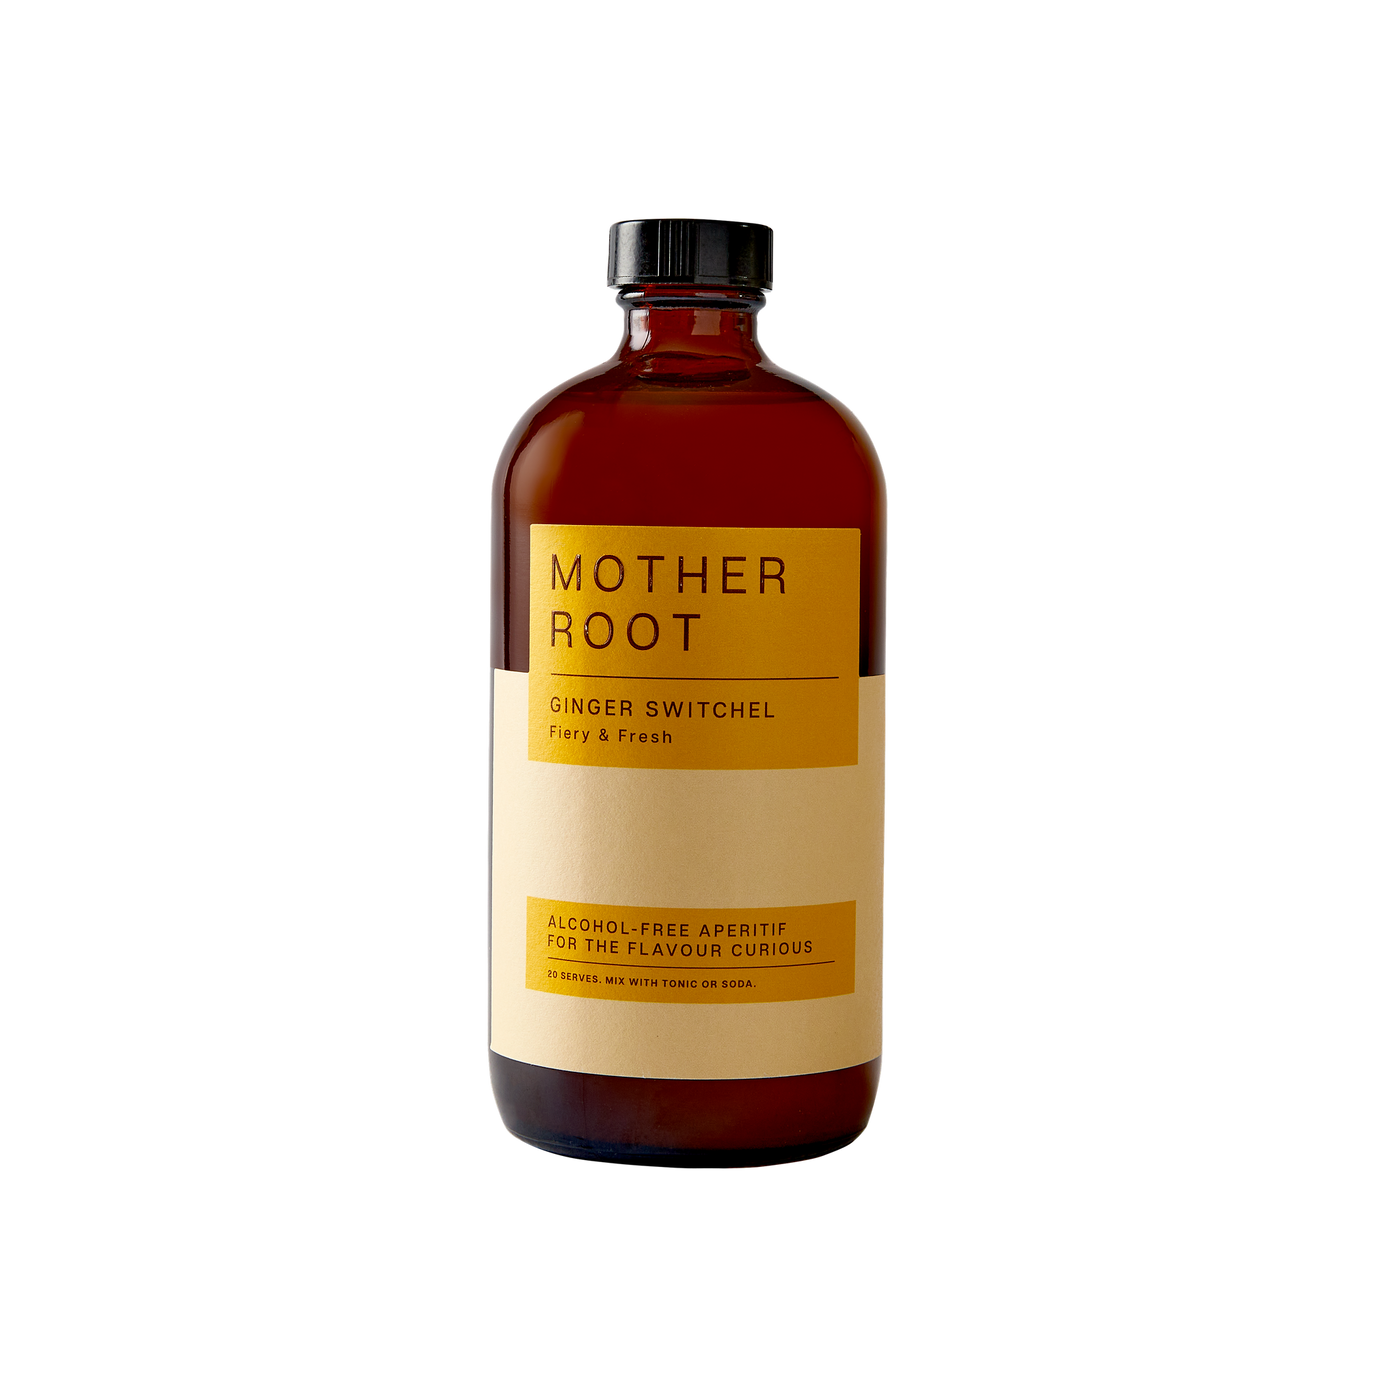 Mother Root Alcohol Free Aperitif bottle, front view